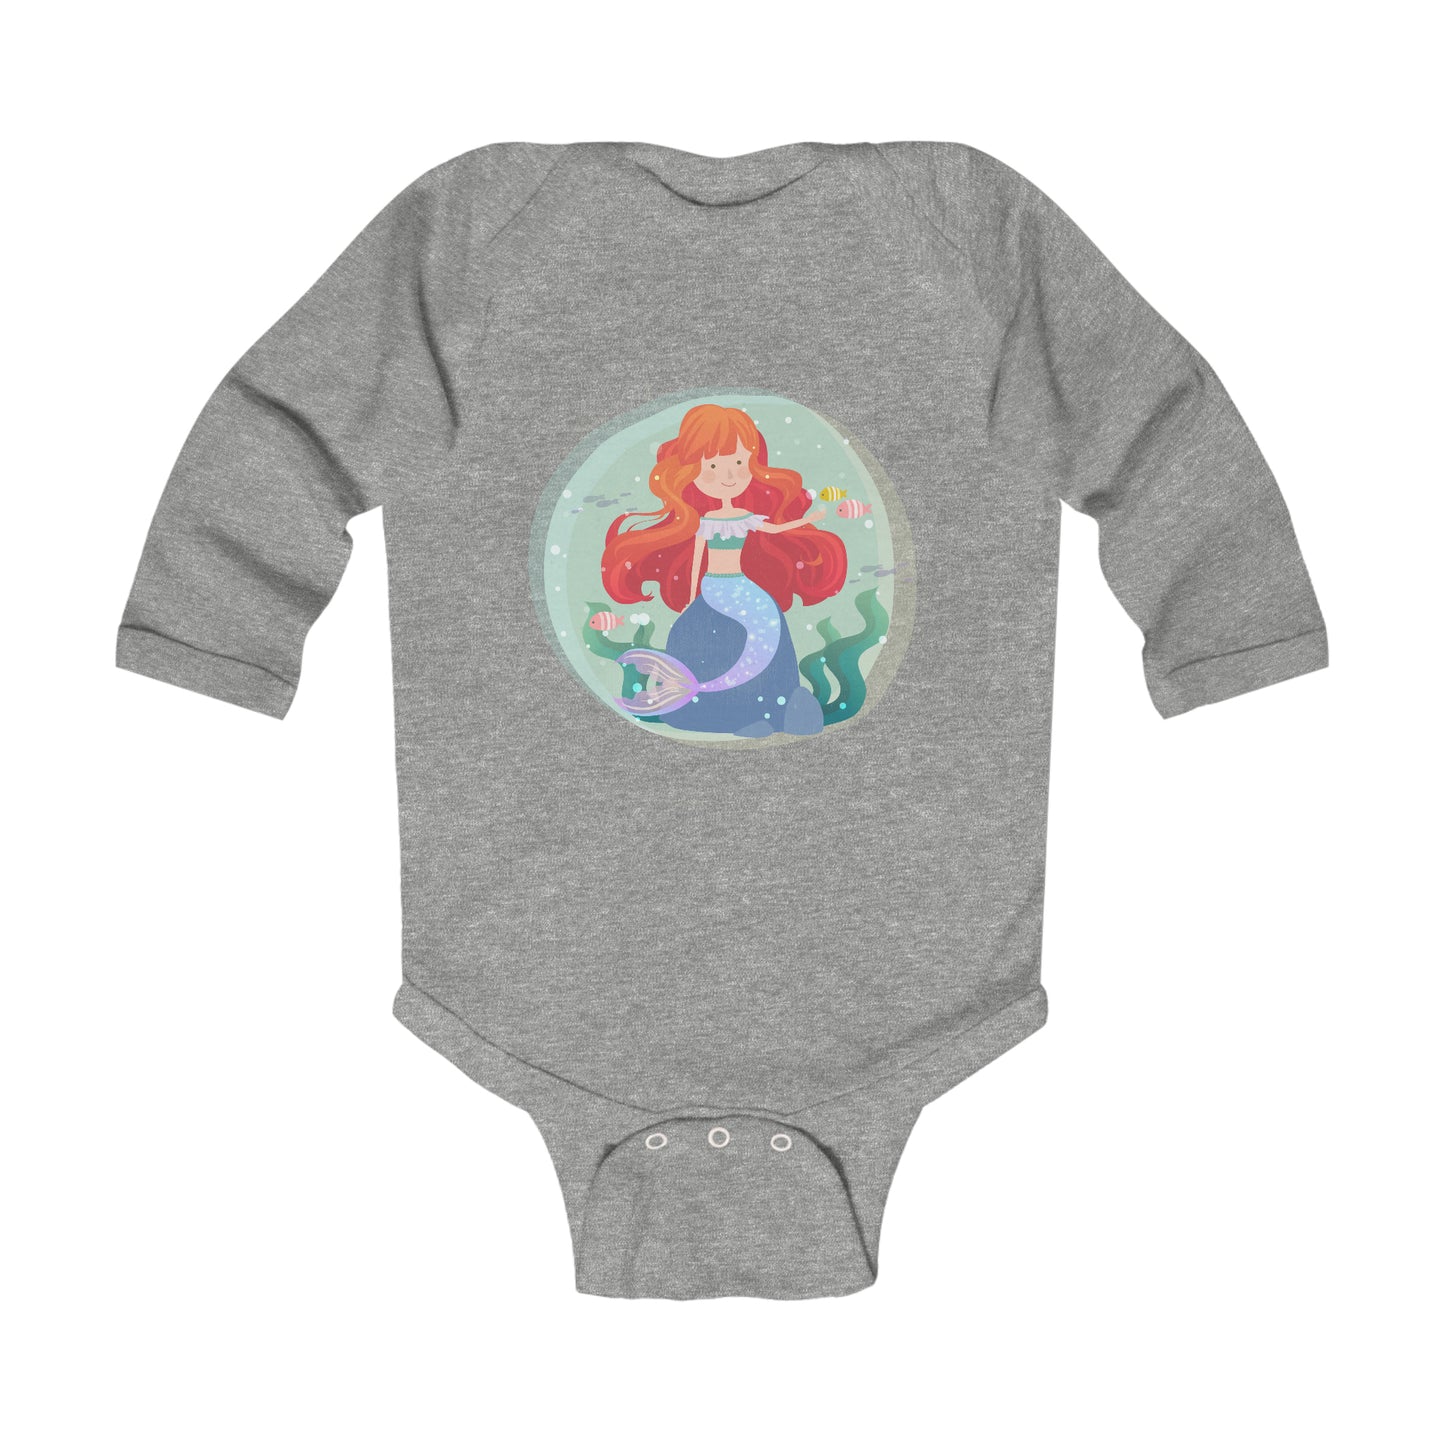 Niccie's Adorable Mermaid Infant Long Sleeve Bodysuit Comfort for Your Baby